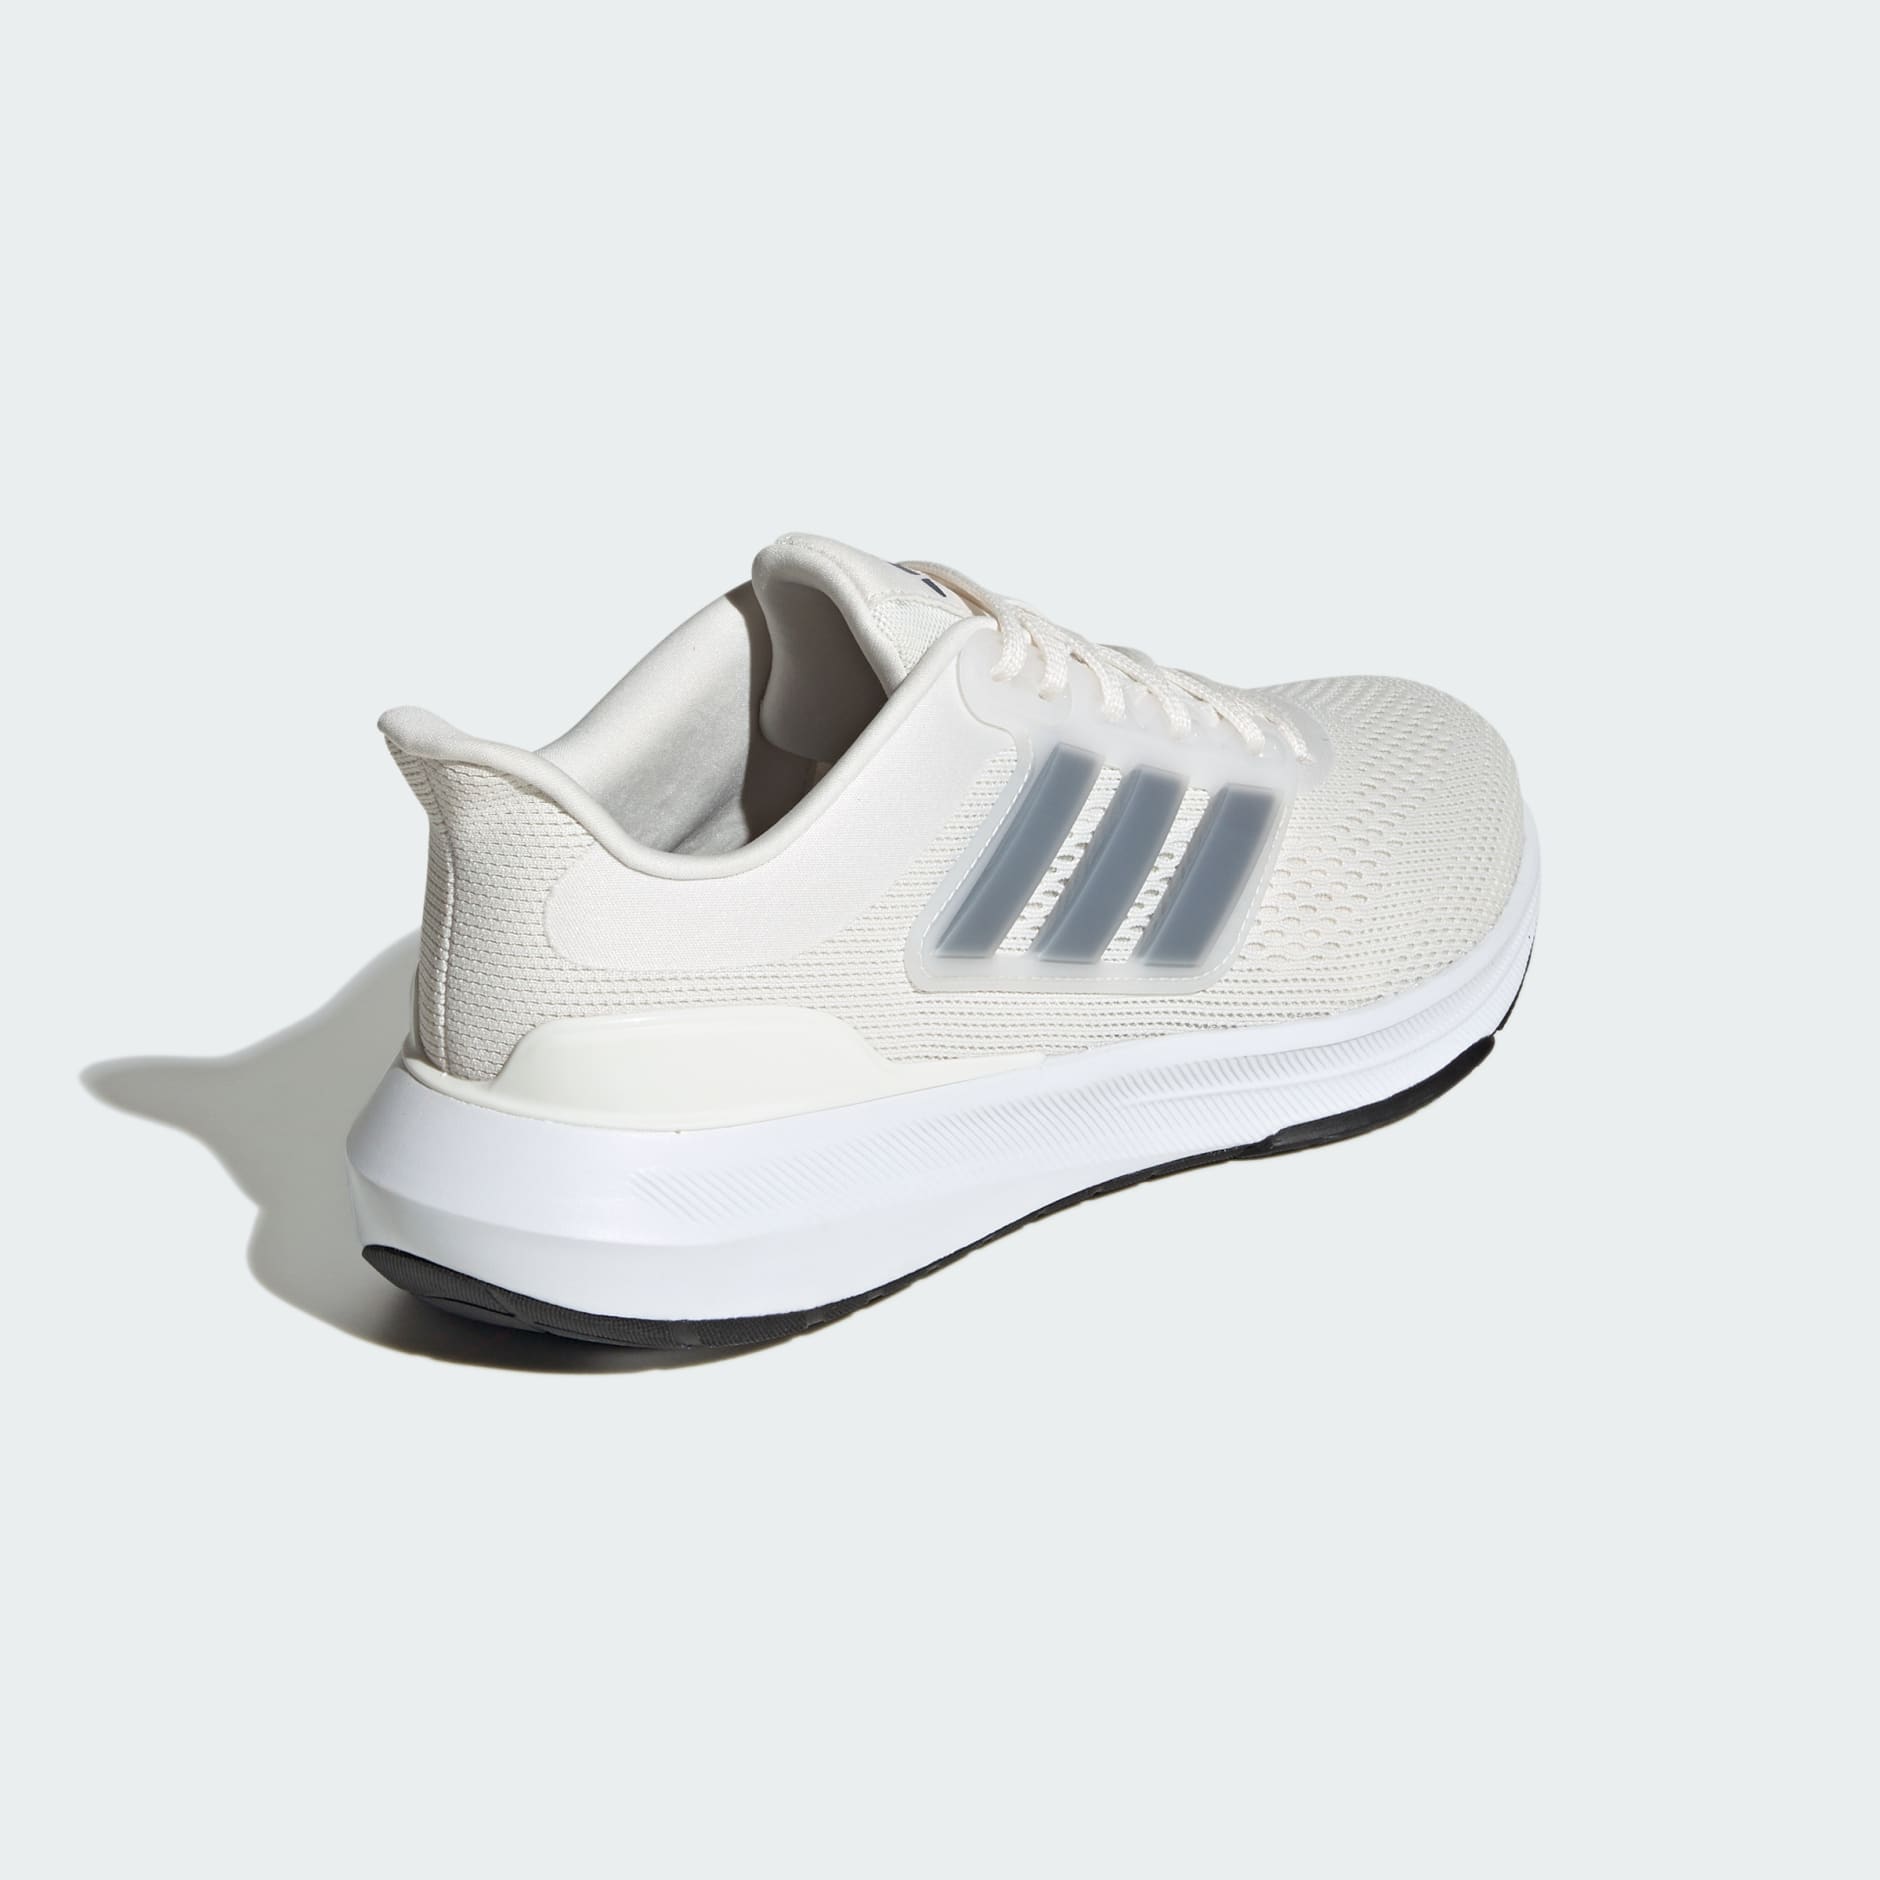 Shoes - Ultrabounce Shoes - White | adidas South Africa